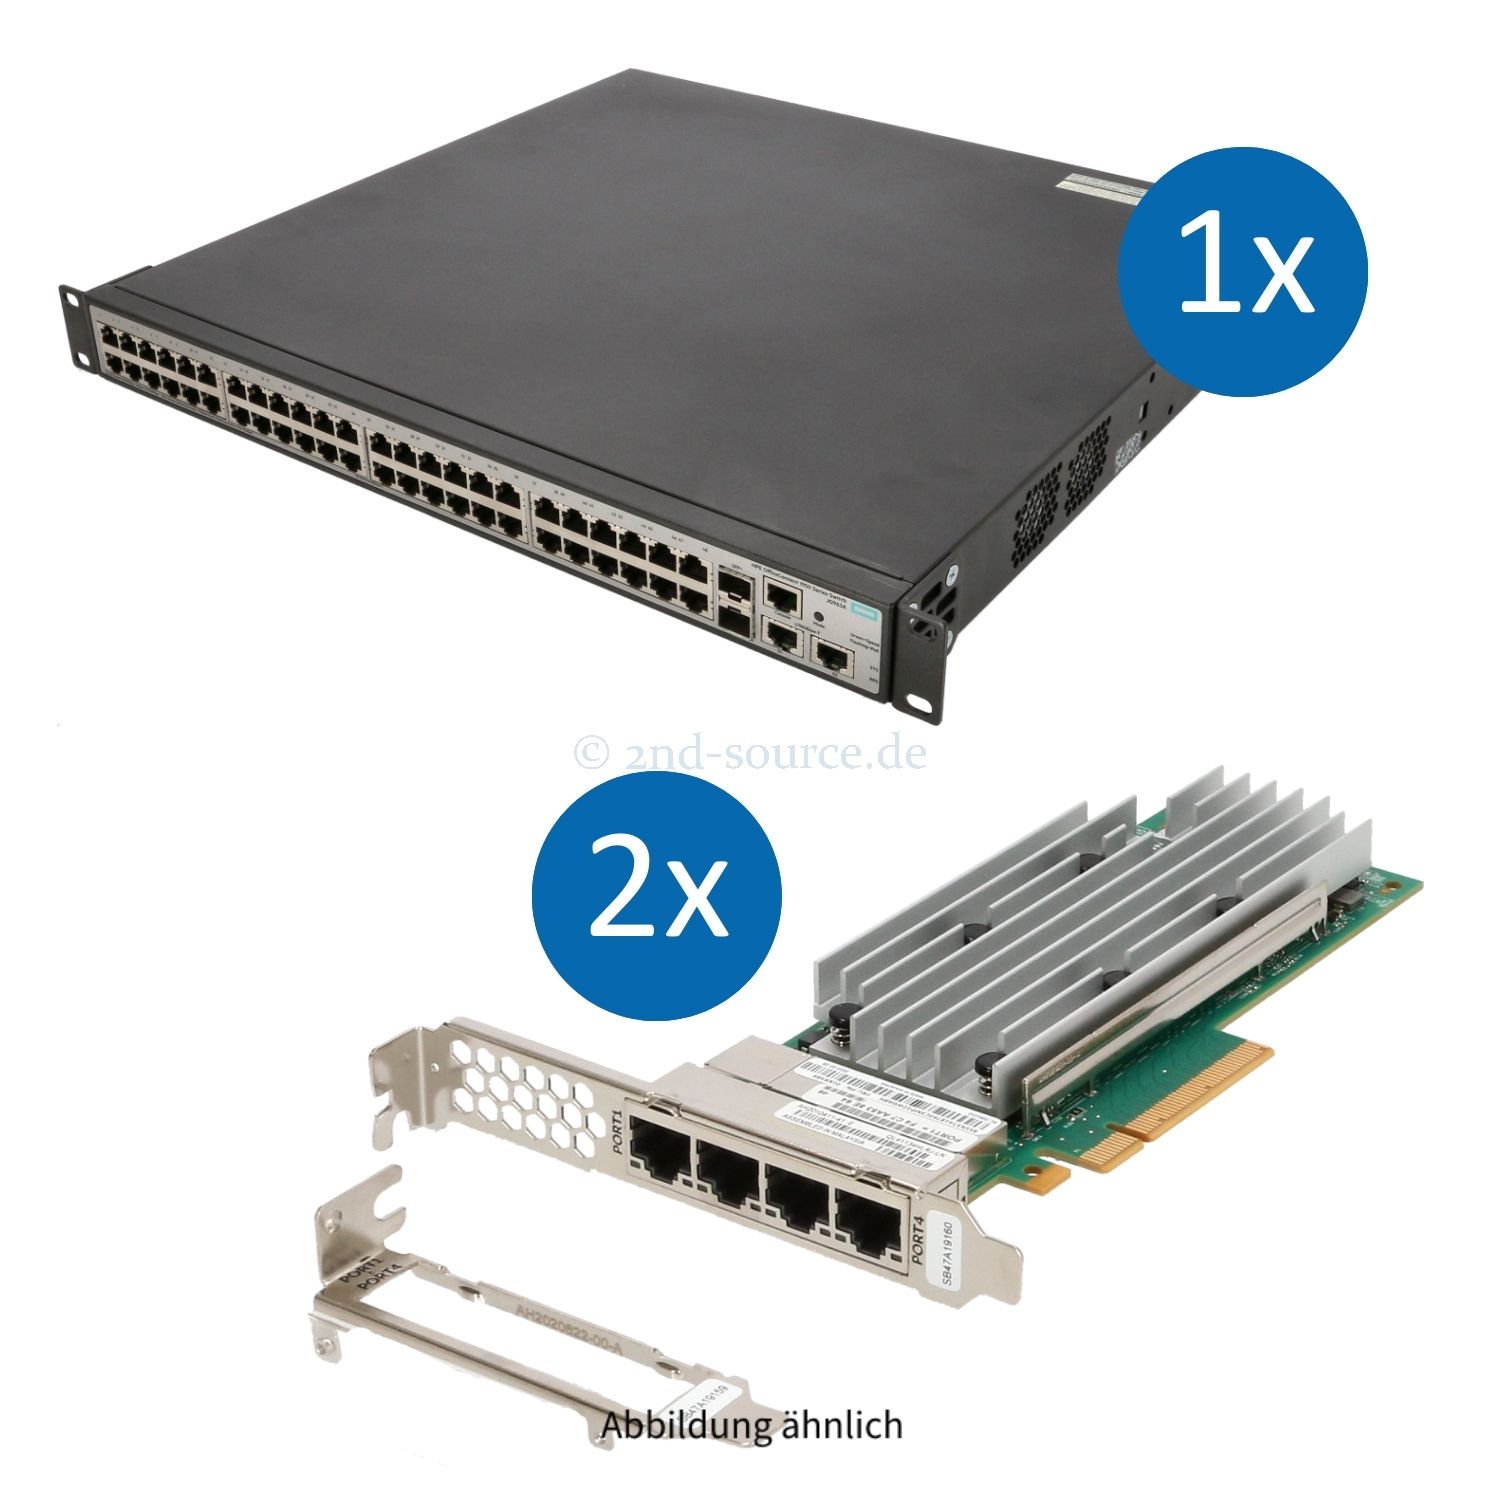 1x HPE OfficeConnect 1950-48G-2SFP+ 48x 1000Base-T 2x 10GBase-T 2x SFP+ und 2x QLogic QL41134 4x 10GBase-T PCIe Server Ethernet Adapter